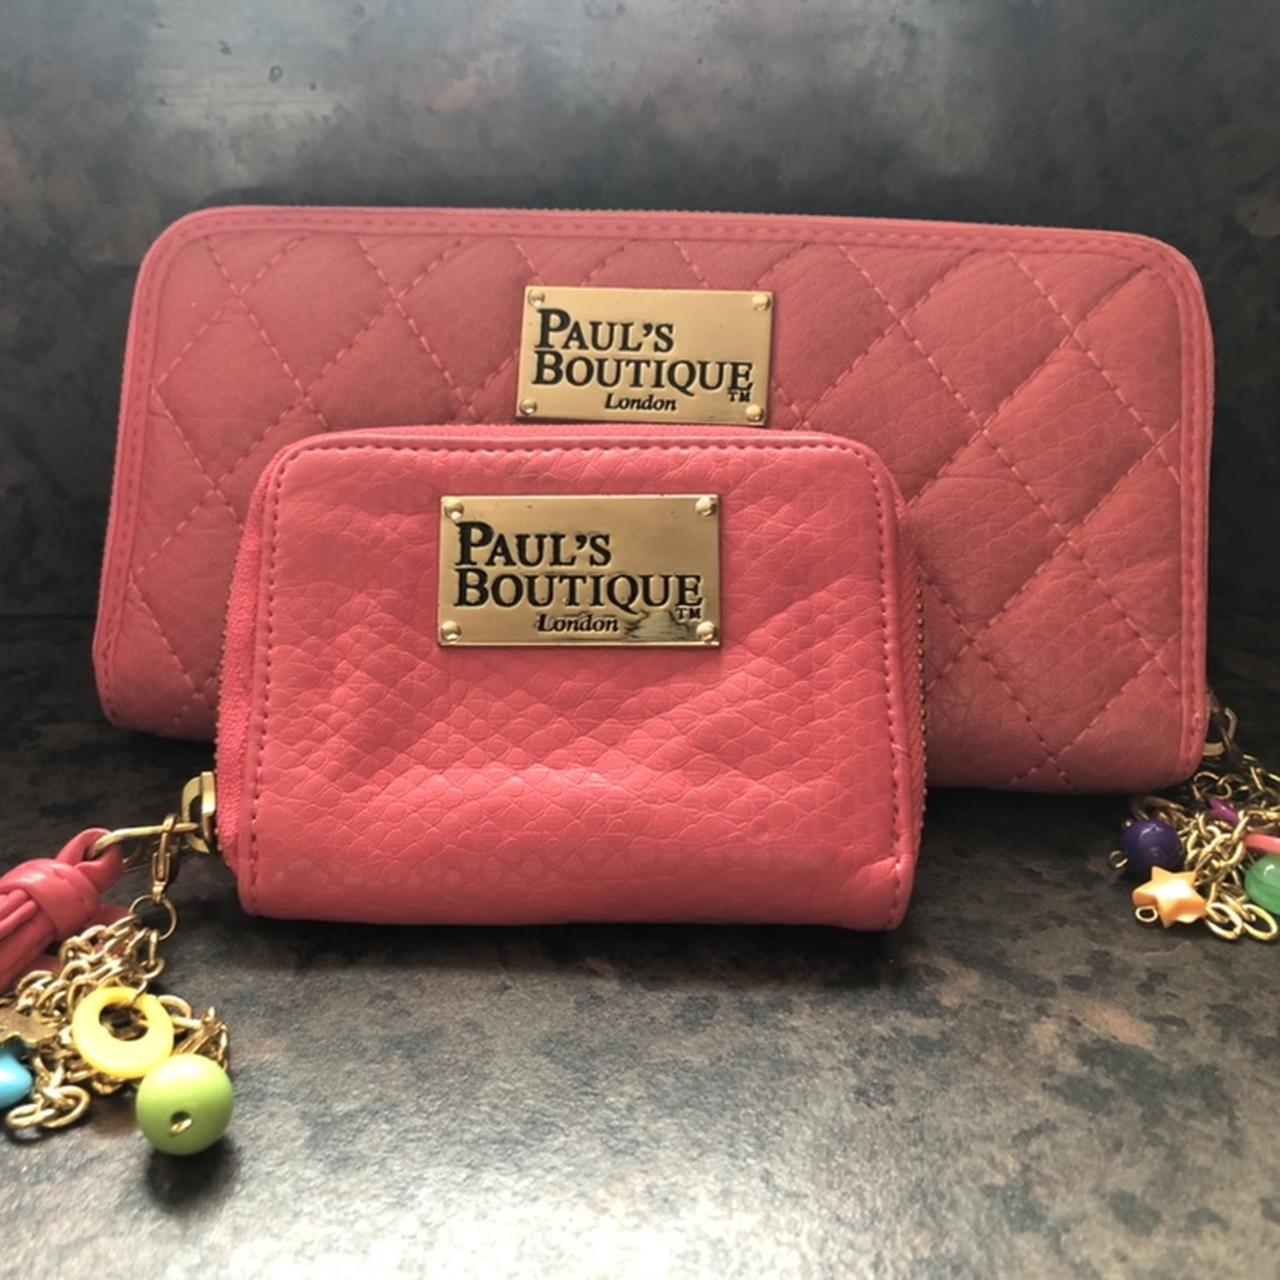 Paul's boutique purse and coin purse 